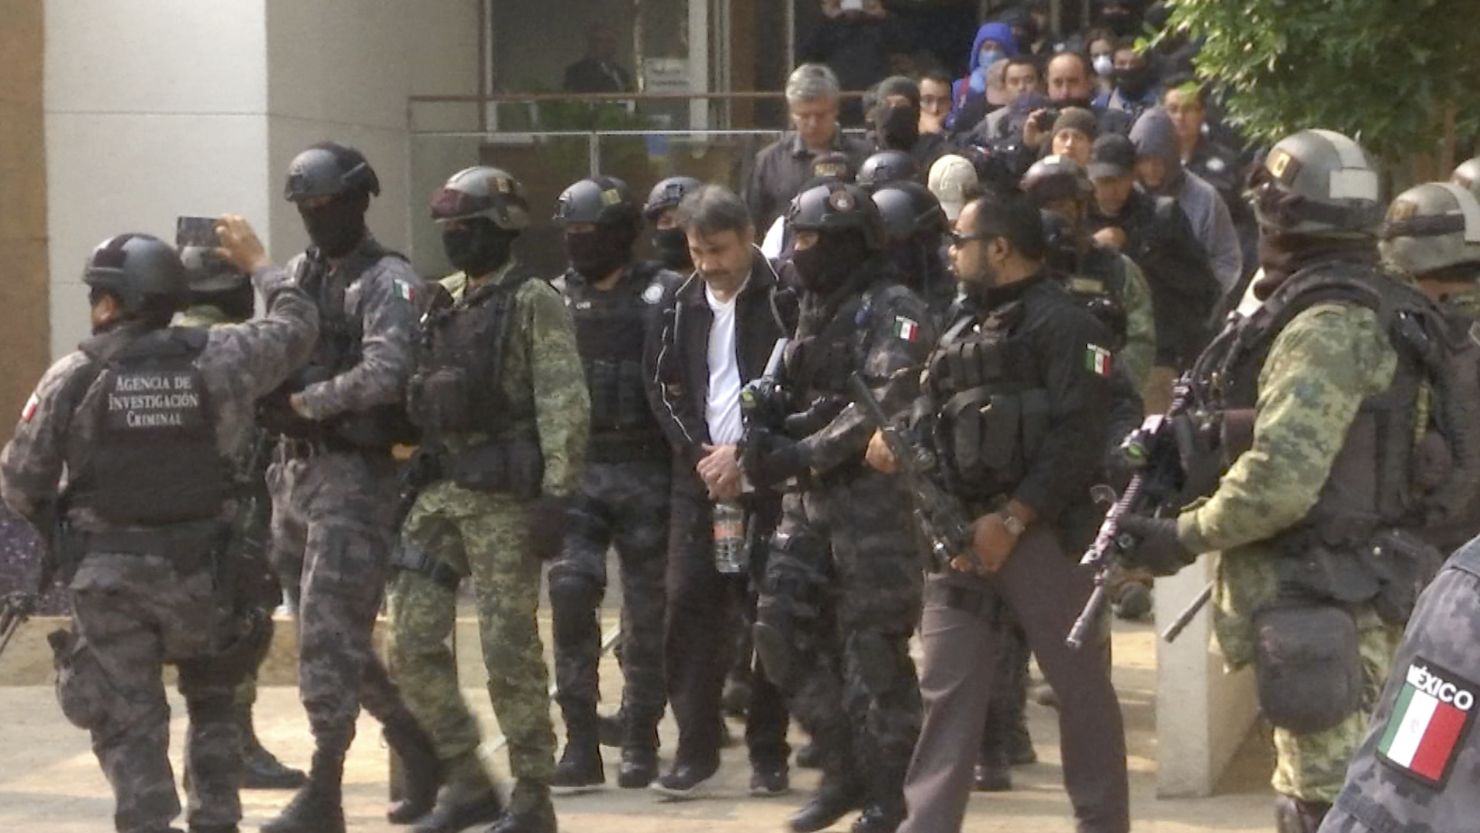  Dámaso López Nuñez is escorted by police after his capture at an apartment building in Mexico City. 